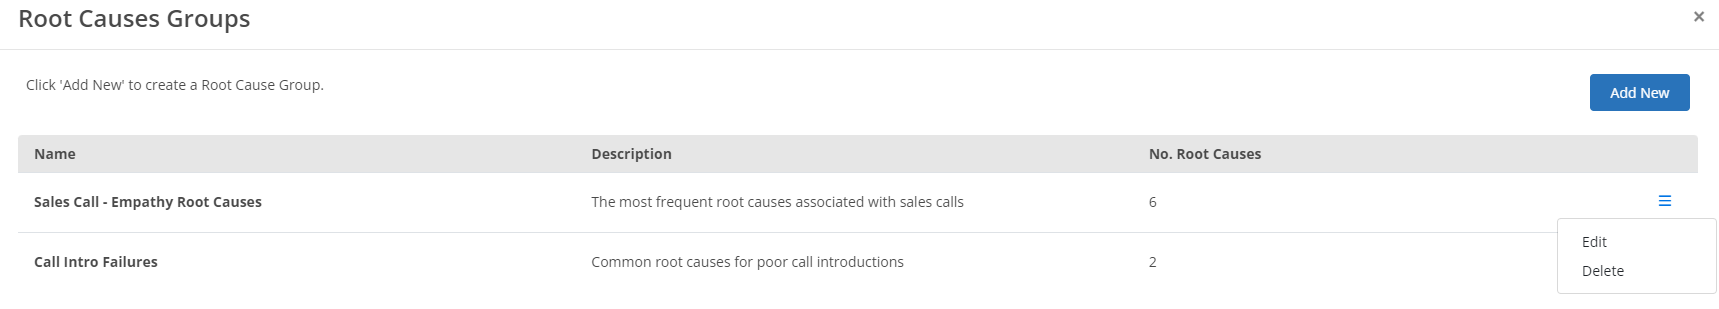 Root_Cause_Groups_-_Production_Screenshot_6.png